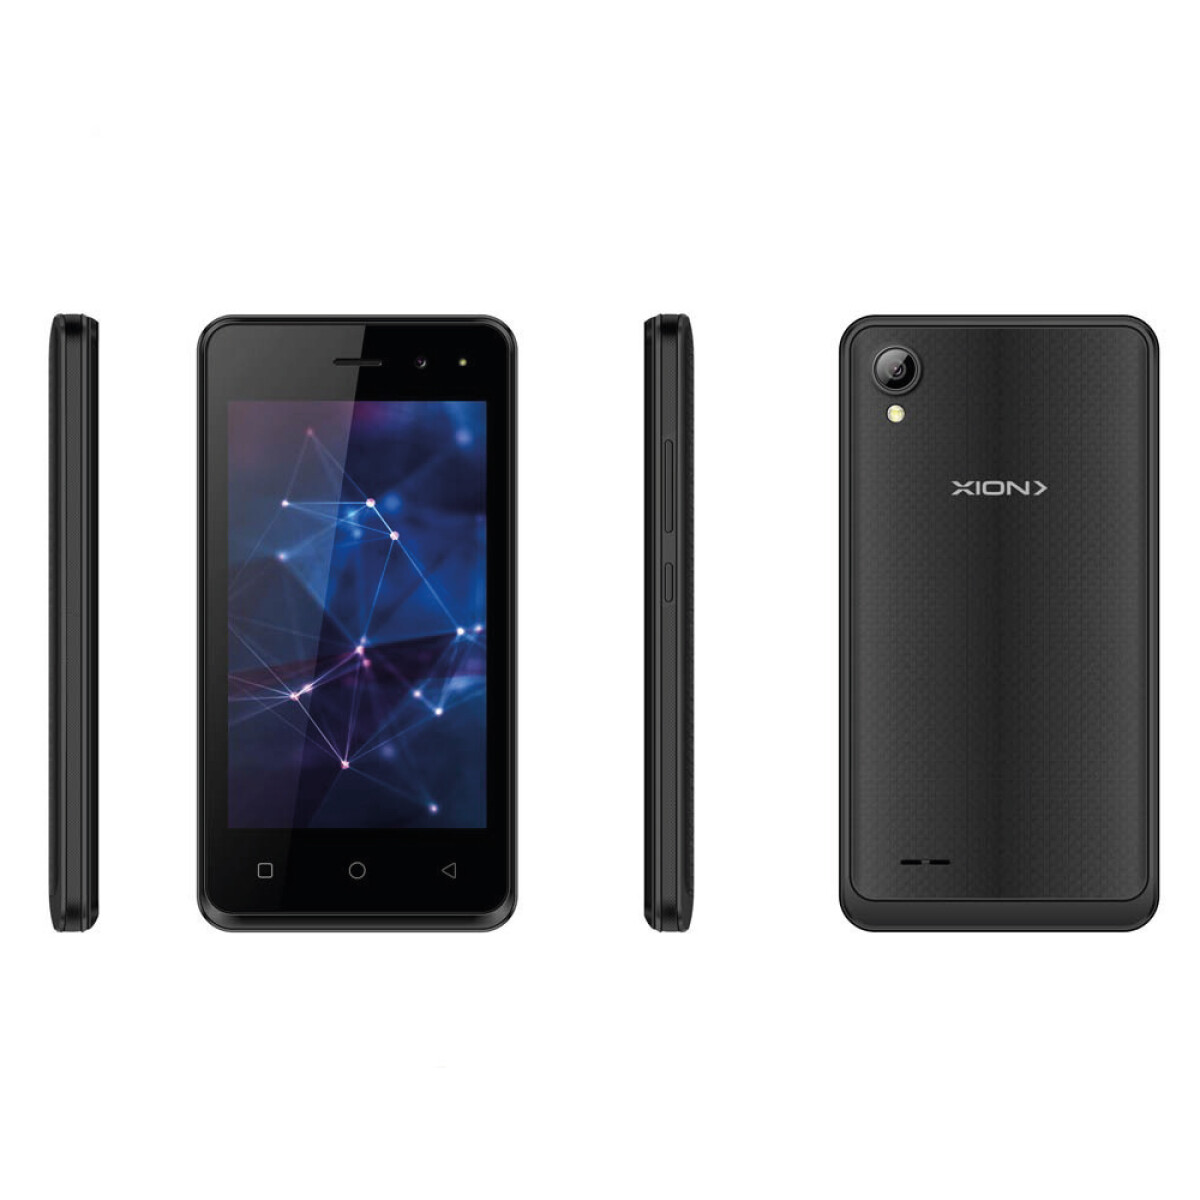 Smartphone Android 4.4 4" dual camera 5MP 